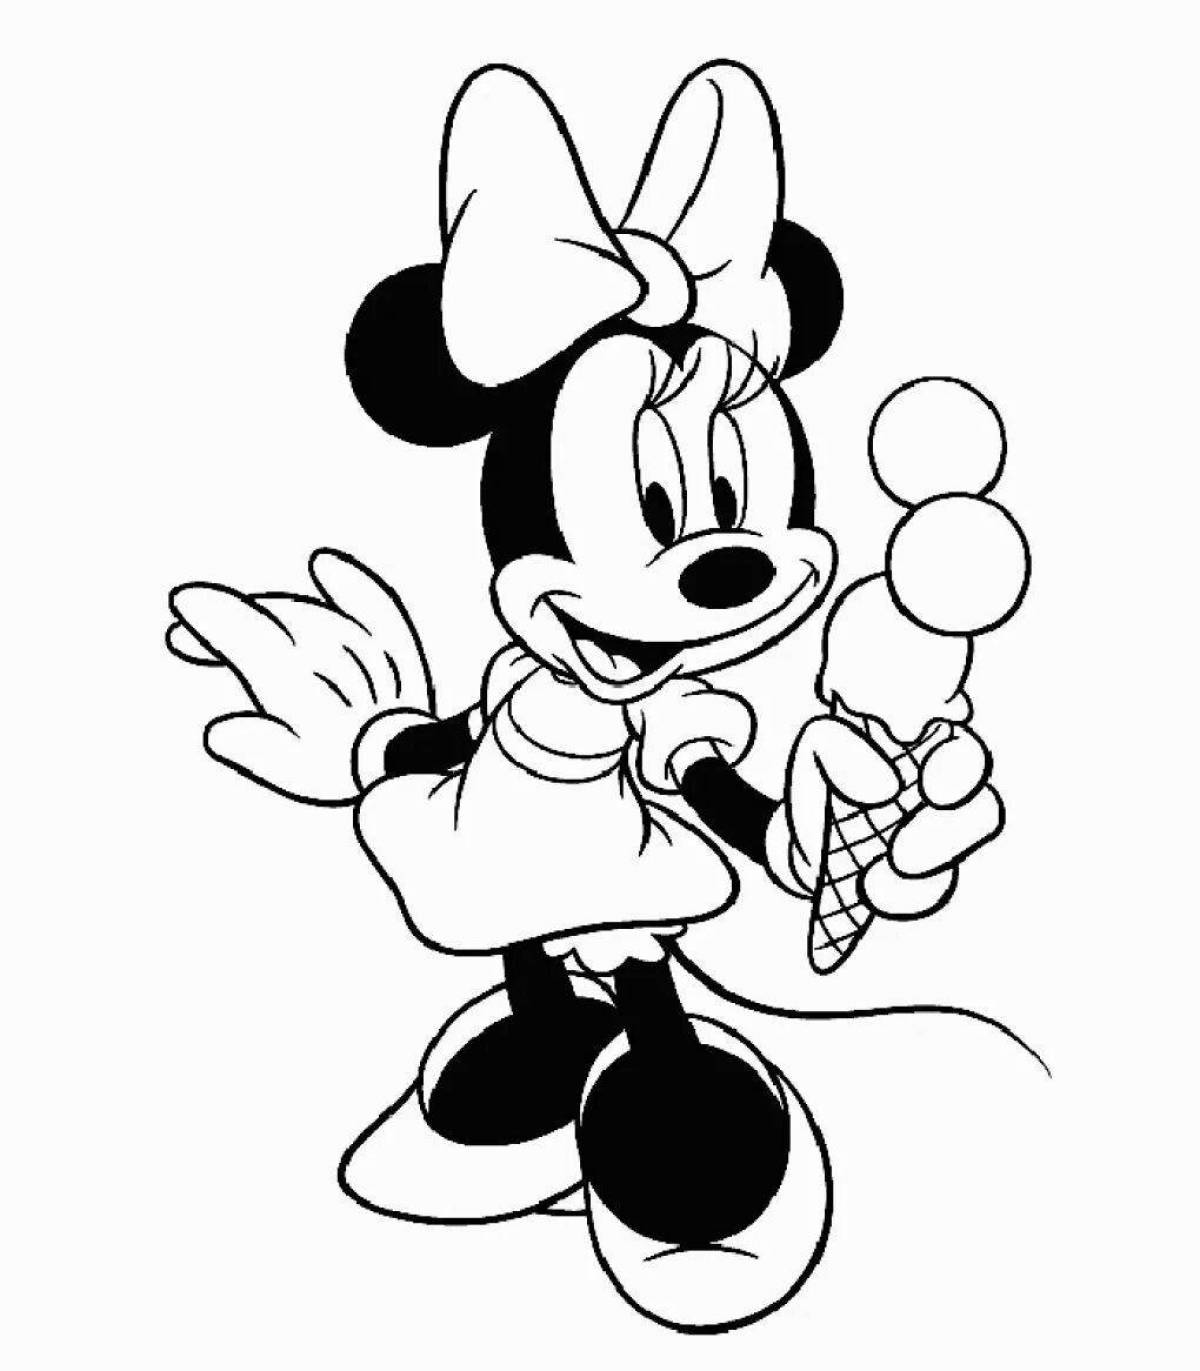 Coloring page adorable minnie mouse